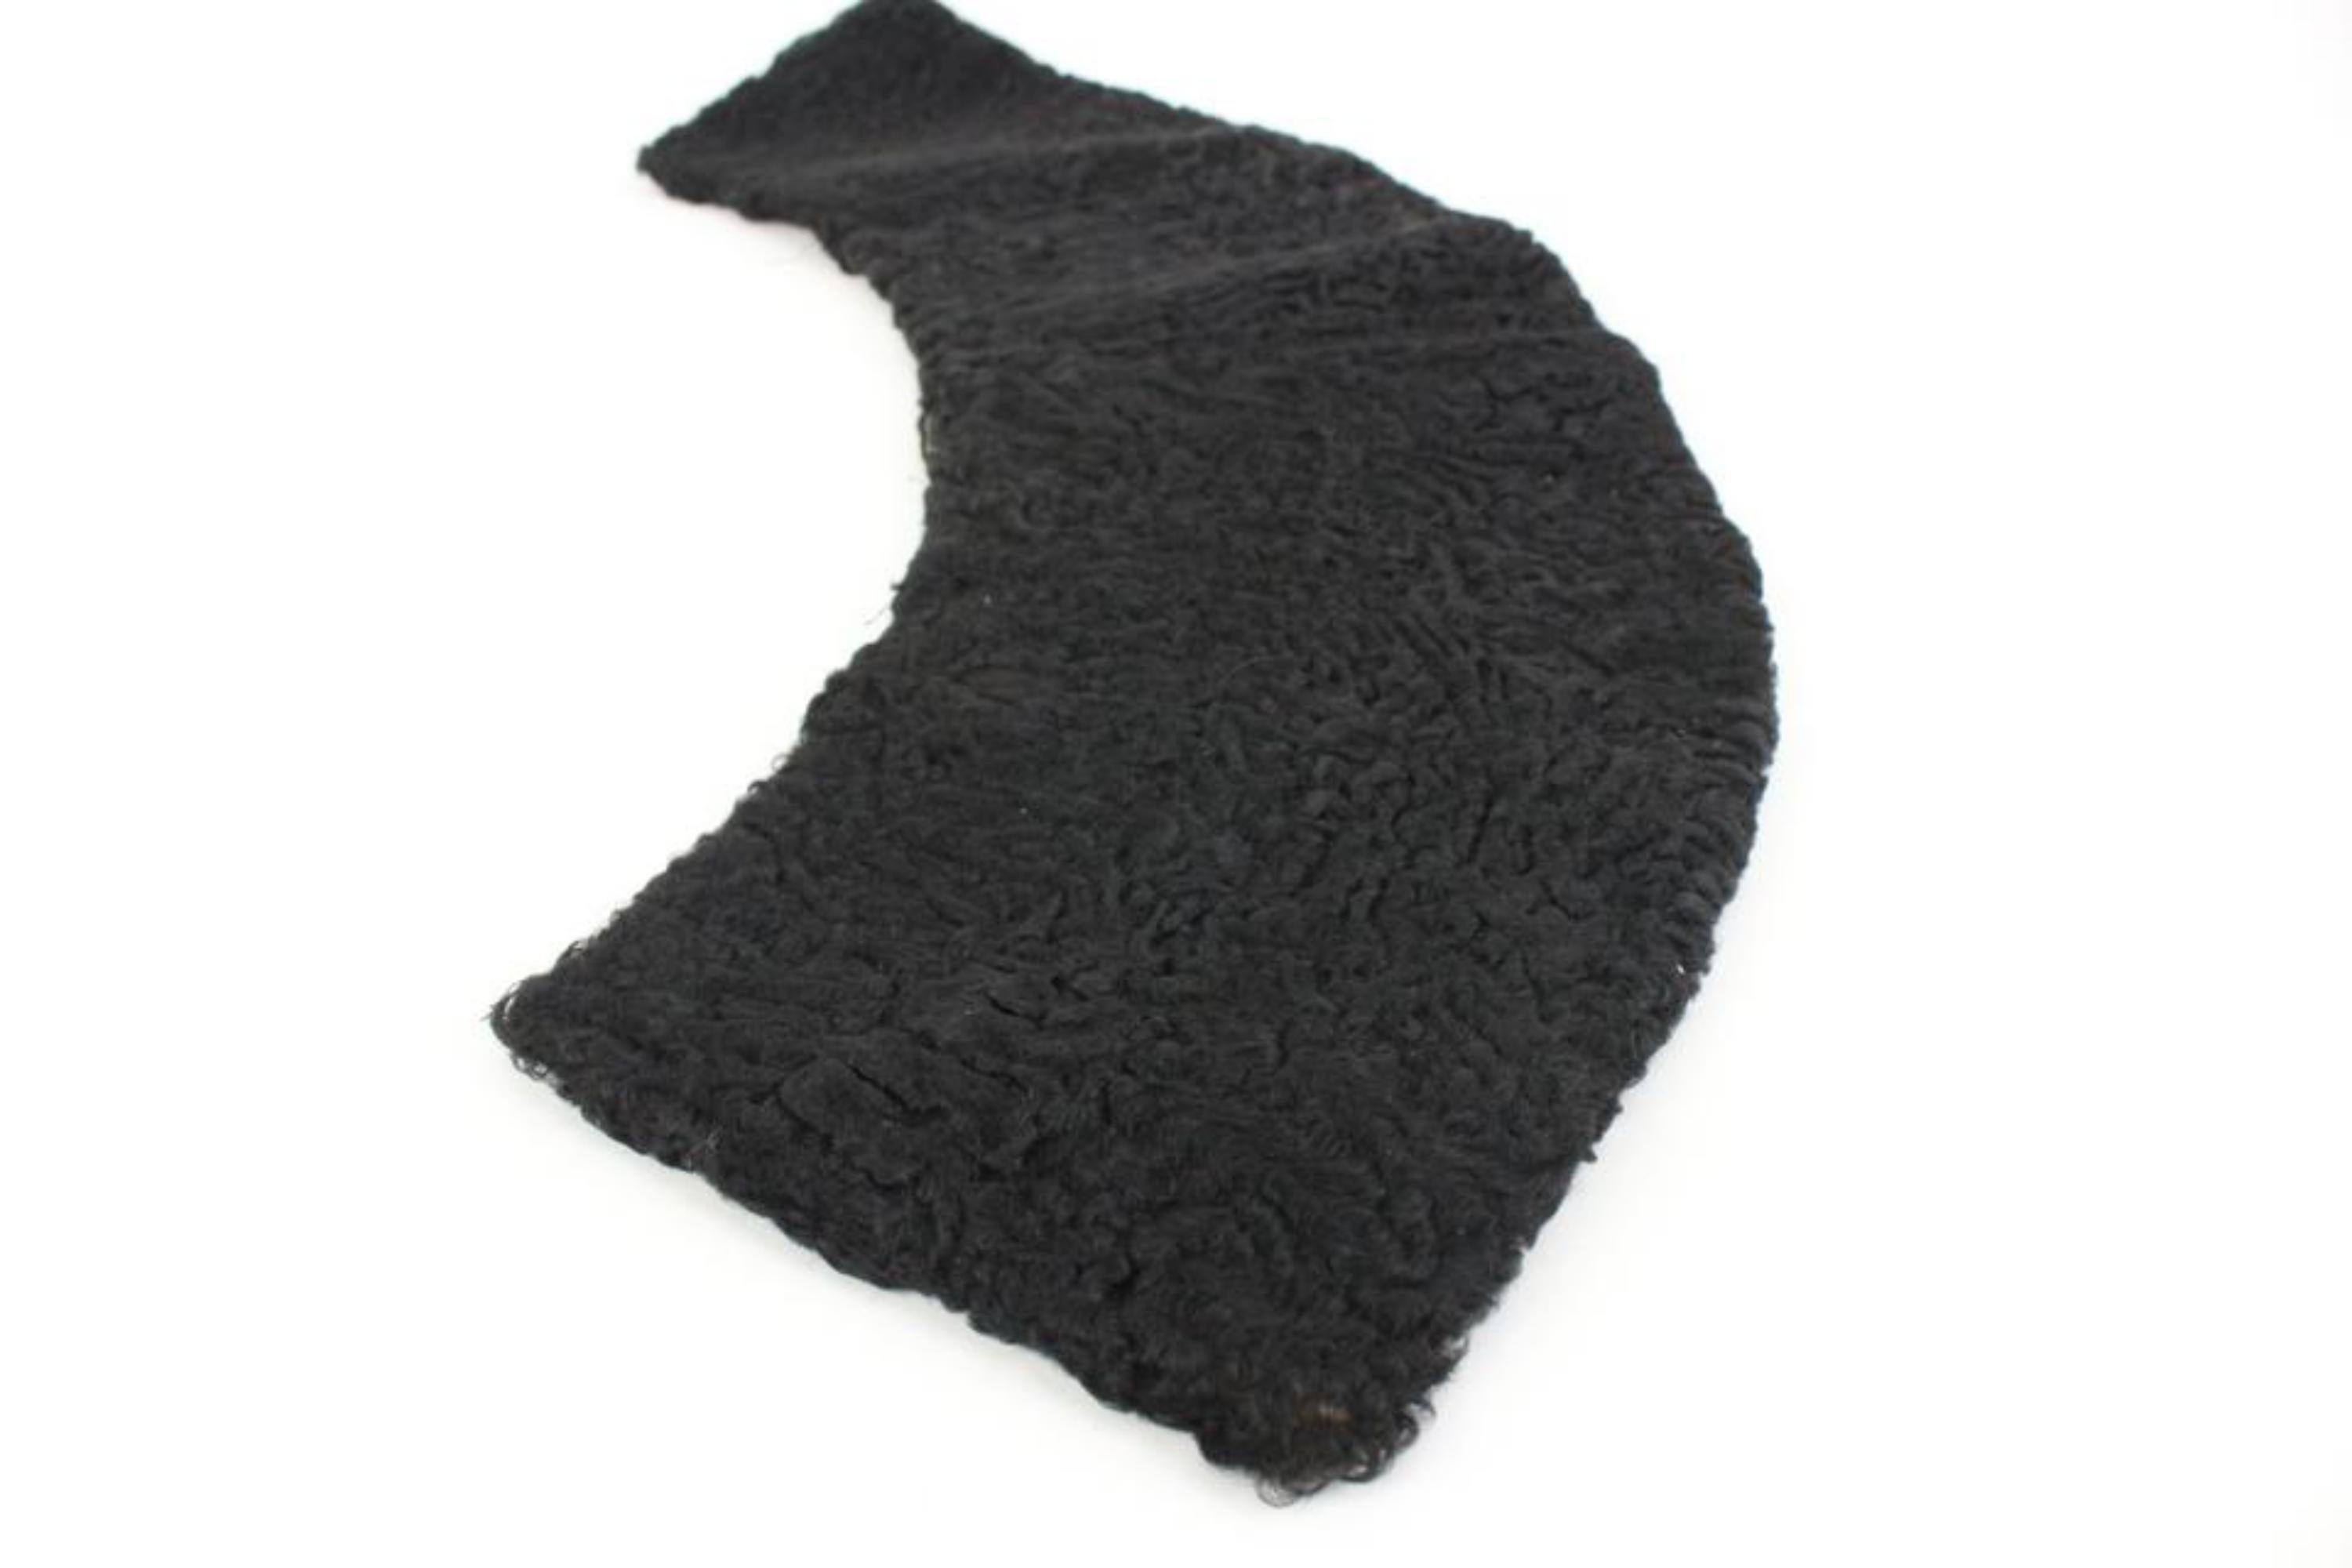 Other Black Astrakhan Fur Scarf Wrap Stole 14ot412s In Good Condition For Sale In Dix hills, NY